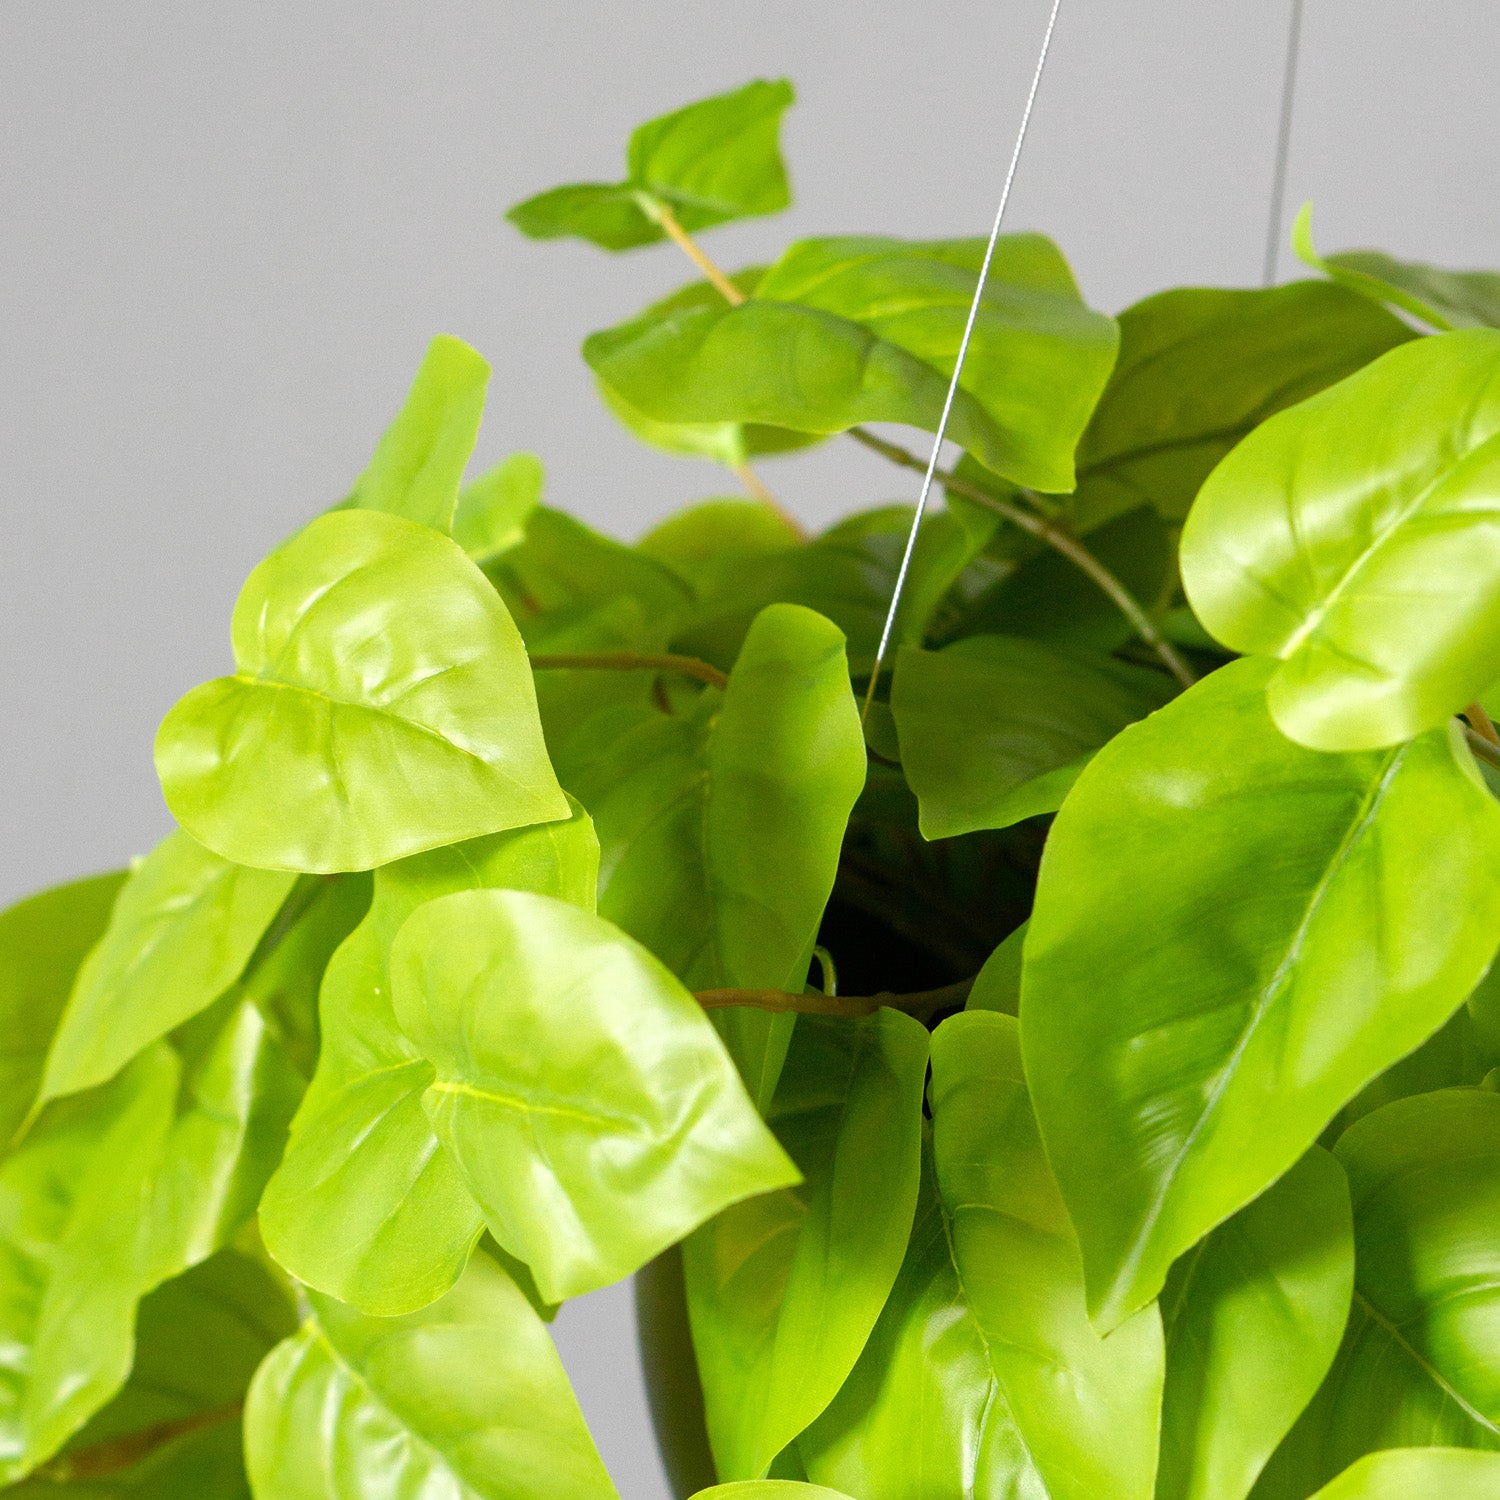 Hanging Planter with Philodendron, Lime